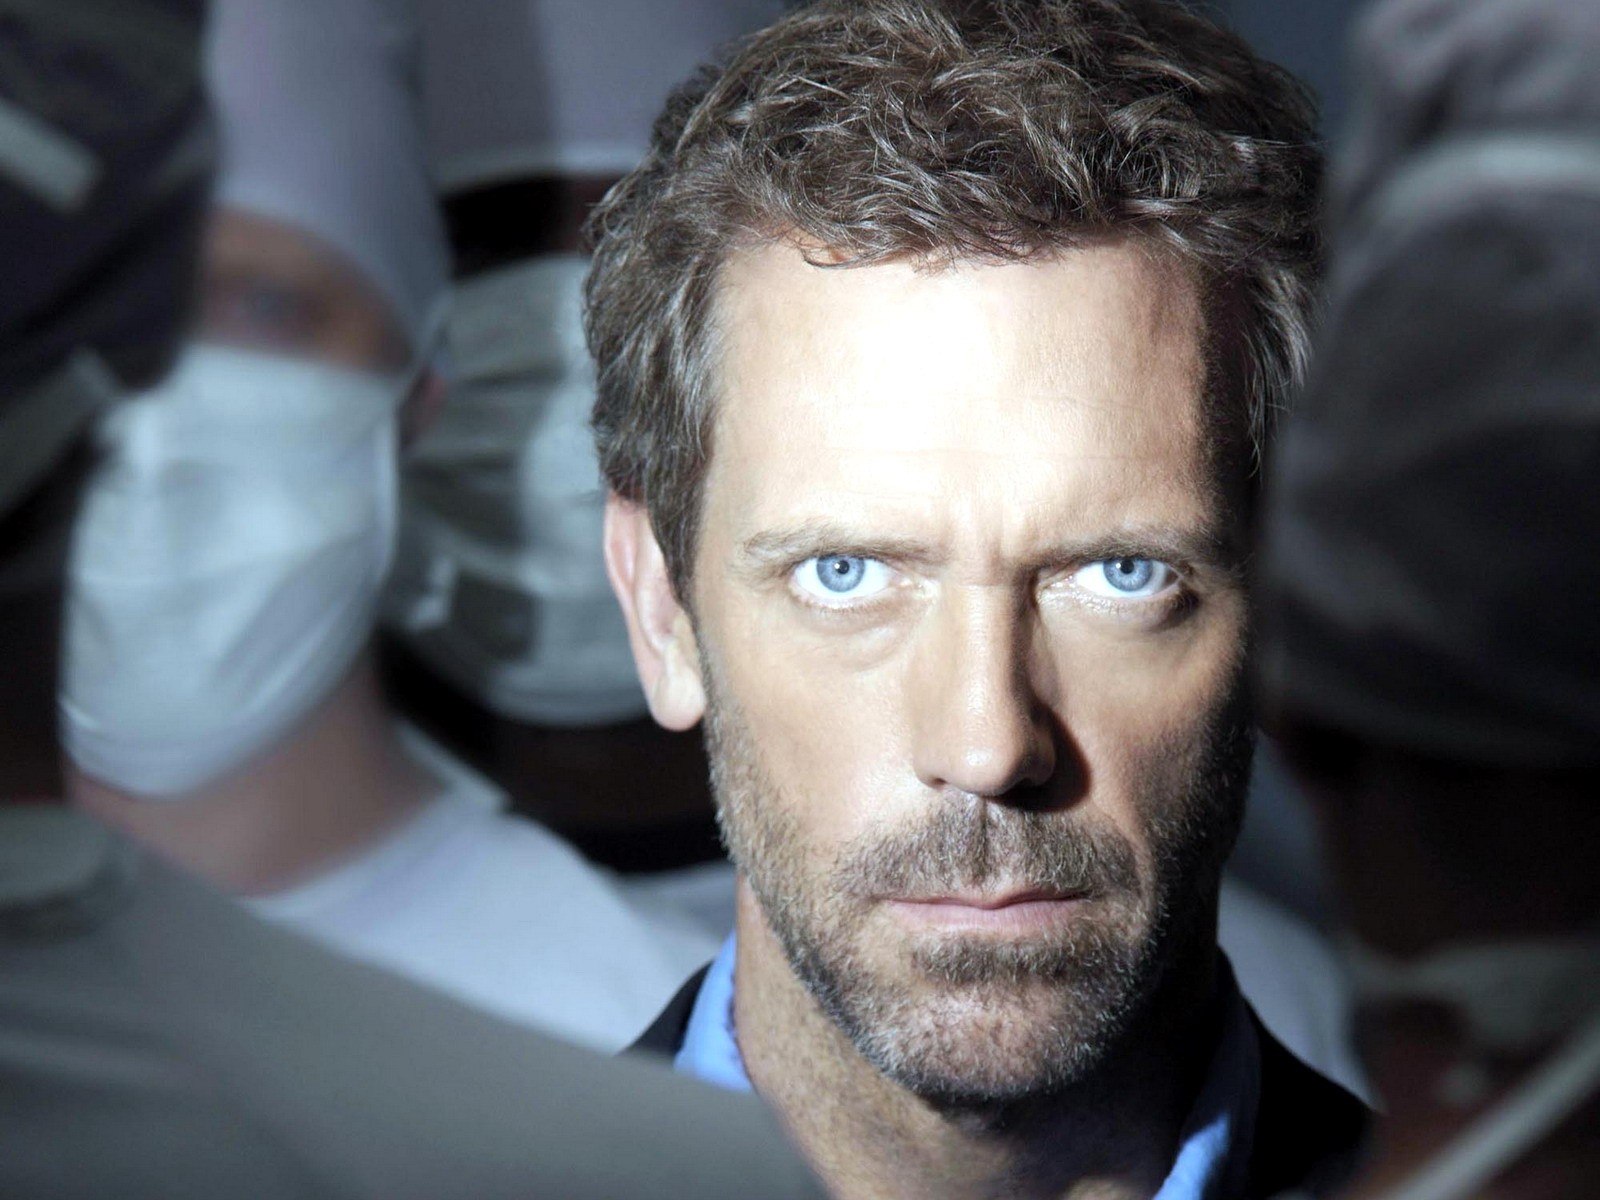 house-md-hugh-laurie-dr-gregory-house-1481.jpg